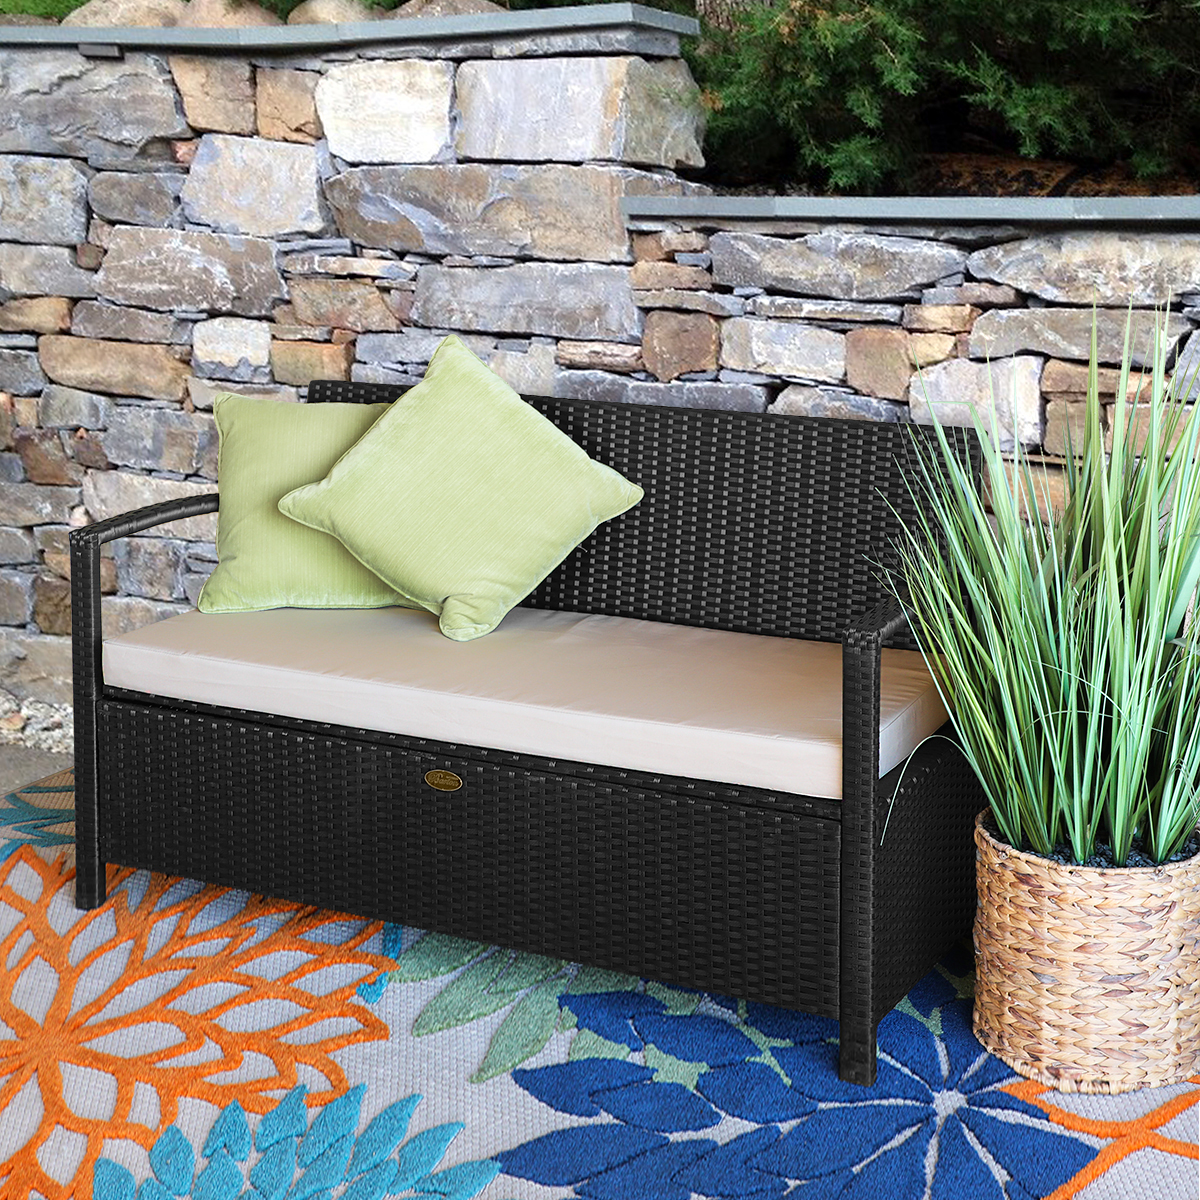 Barton Outdoor All-Weather Storage Bench Thick Seat Cushion w/ Backrest Patio Deck Box Wicker - image 1 of 7